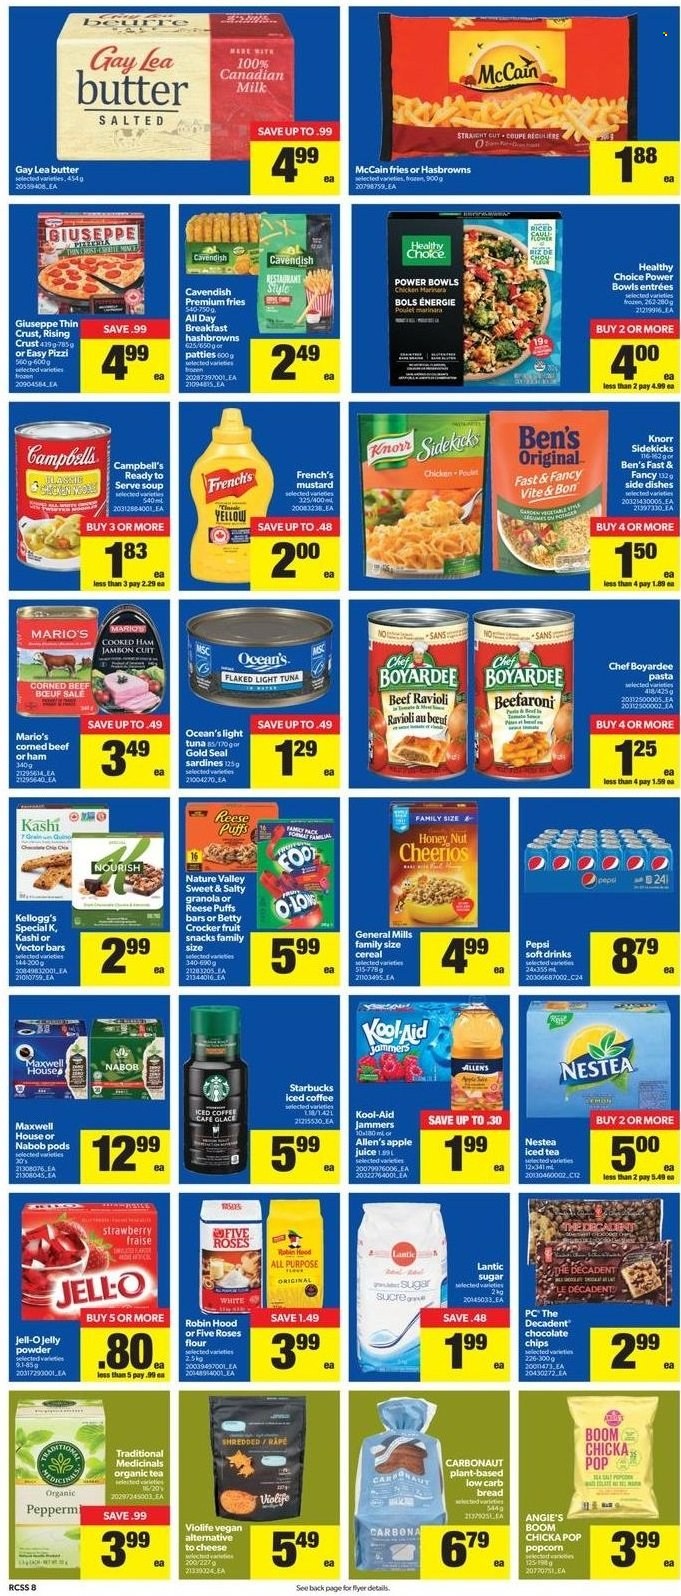 thumbnail - Real Canadian Superstore Flyer - January 13, 2022 - January 19, 2022 - Sales products - bread, puffs, sardines, tuna, Campbell's, ravioli, soup, pasta, Healthy Choice, cooked ham, corned beef, cheese, milk, butter, McCain, hash browns, potato fries, jelly, Kellogg's, popcorn, flour, sugar, Jell-O, light tuna, Chef Boyardee, cereals, Cheerios, Nature Valley, mustard, Pepsi, juice, ice tea, soft drink, iced coffee, Maxwell House, Starbucks, beef meat, Carbona, Knorr, granola. Page 8.